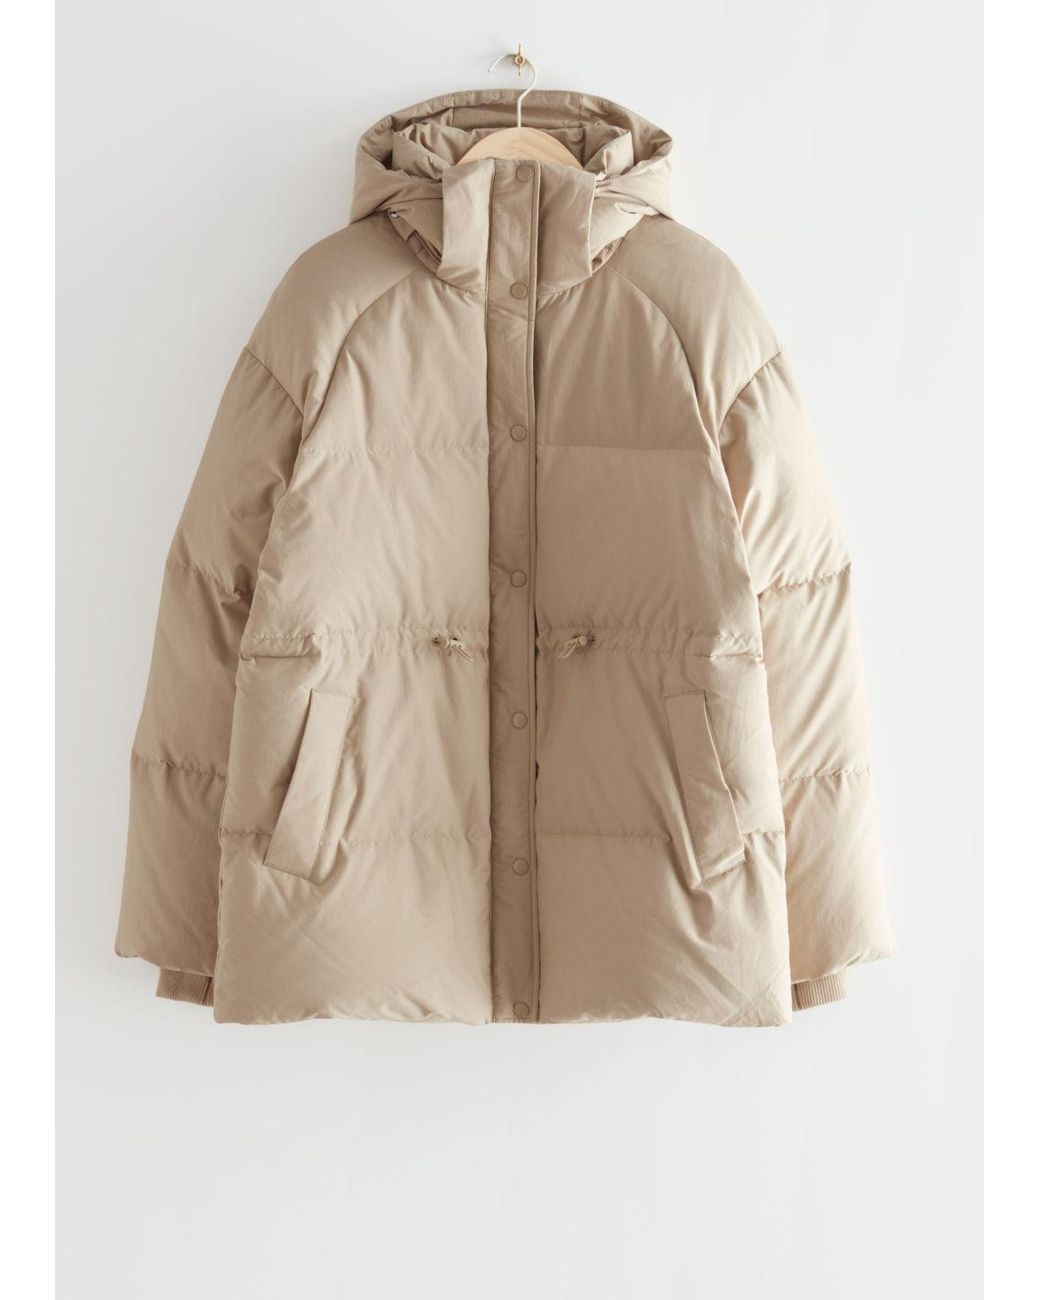 & Other Stories Oversized Hooded Down Puffer Jacket in Natural | Lyst